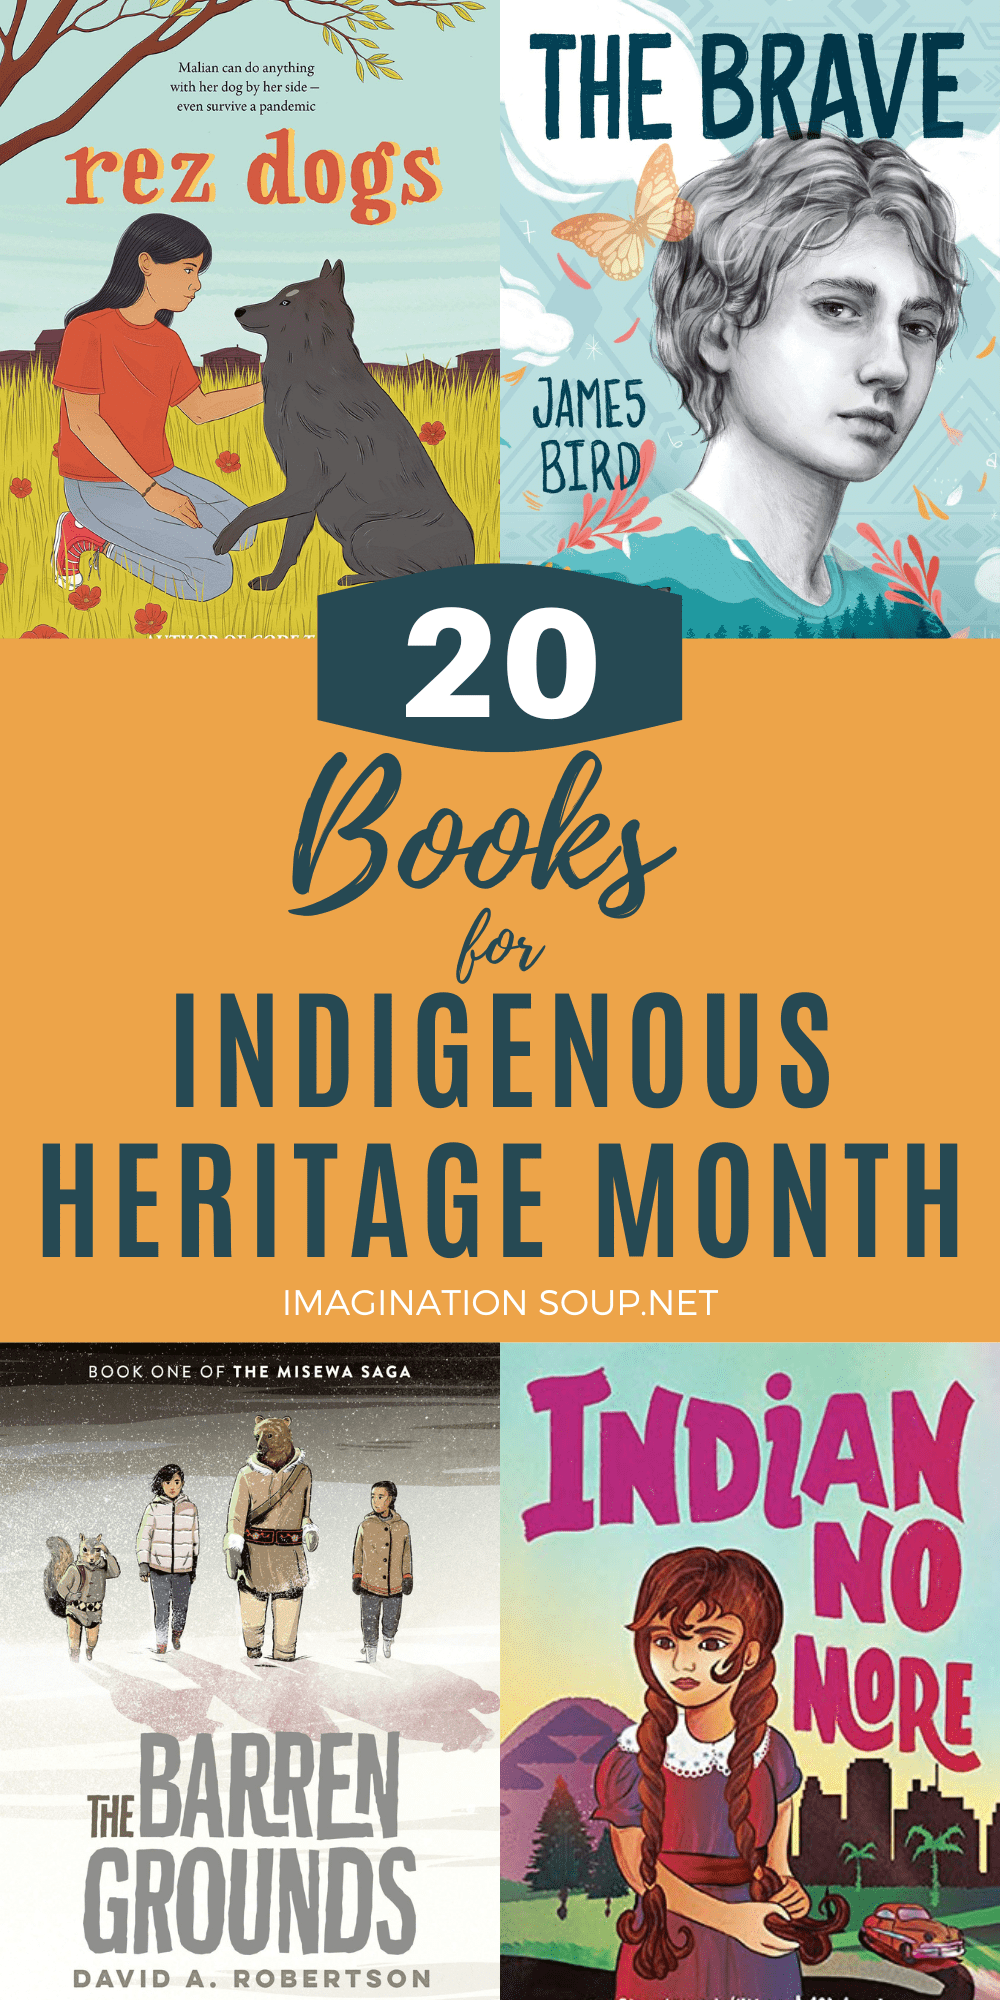 Indigenous Native American Heritage Month Books for Kids